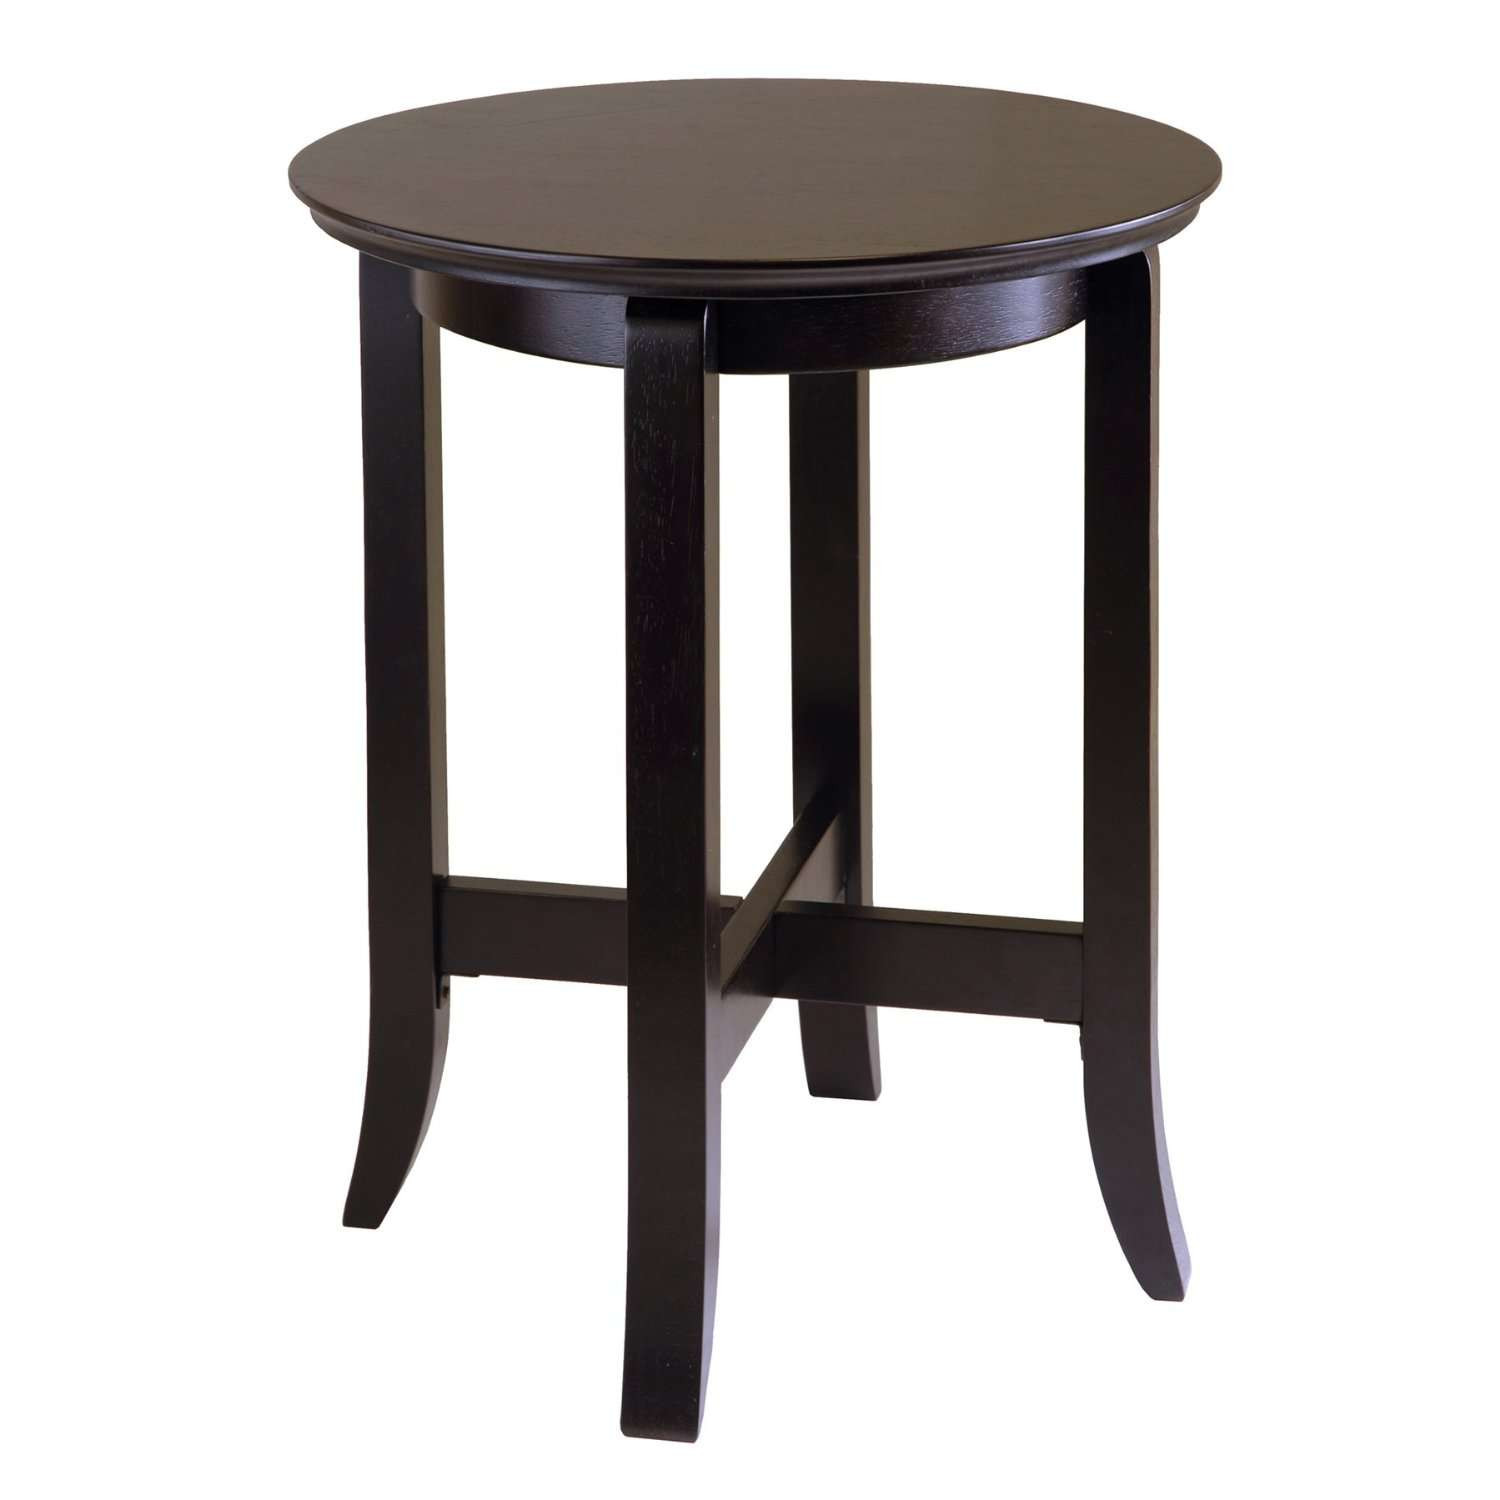 outstanding small patio table cafeattherep decorative side tables tall round end recliner covers for interior cool wood modern black raymour and flanigan elephant with glass top